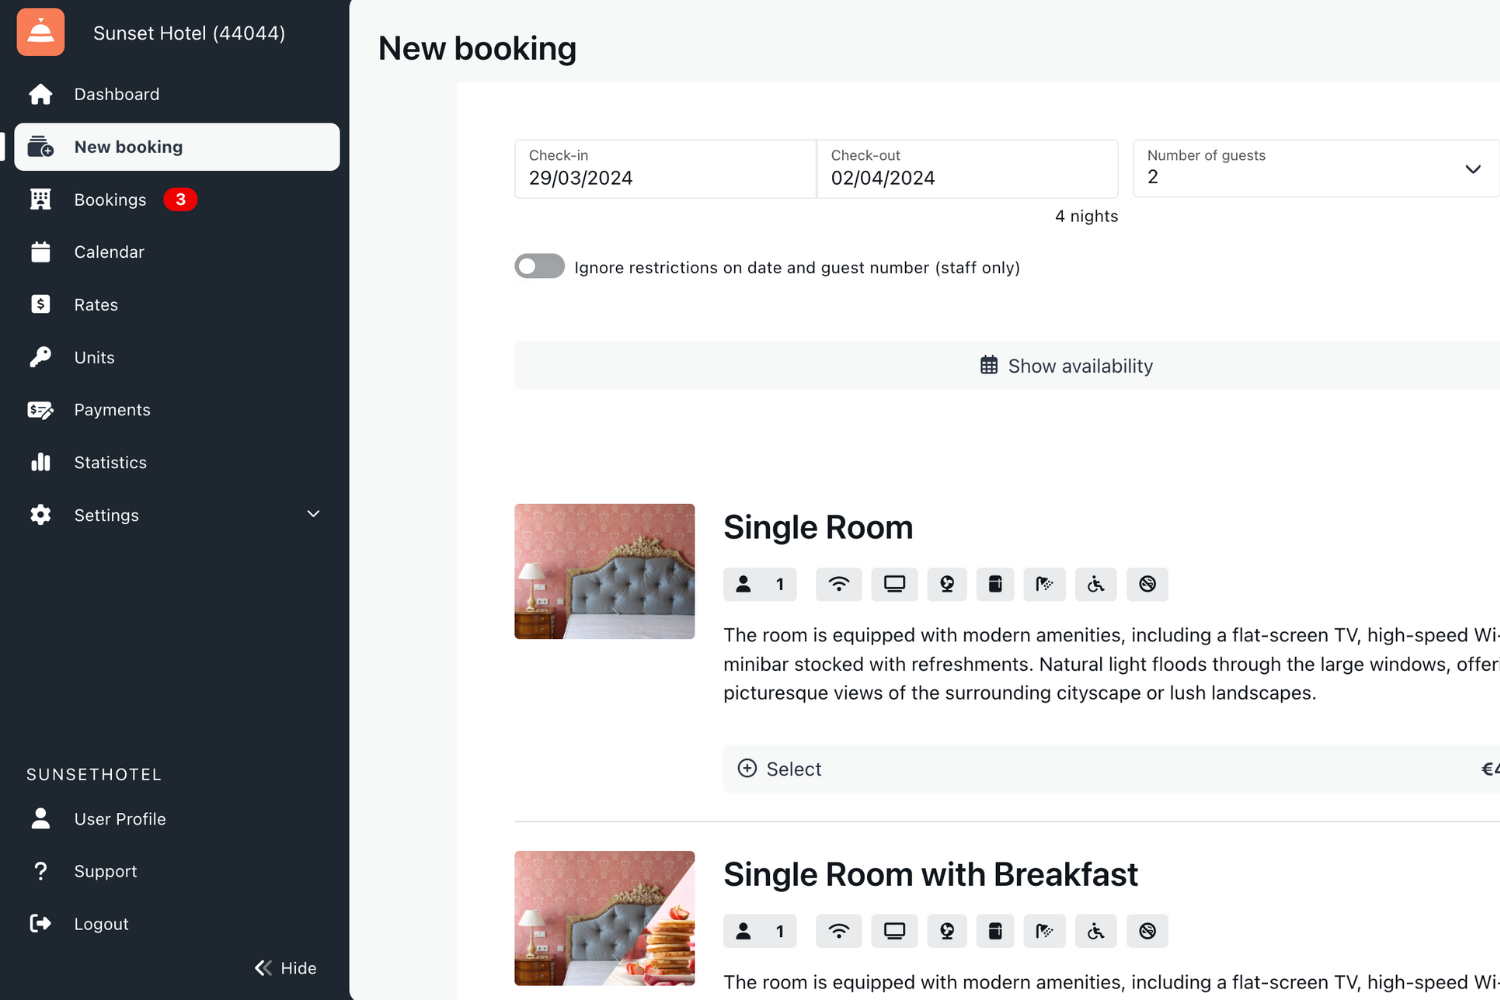 The Bookings page offers easy access to current, upcoming, past, and cancelled bookings, along with any set alerts. Use filters to quickly find specific bookings by number, guest name, room, or dates.